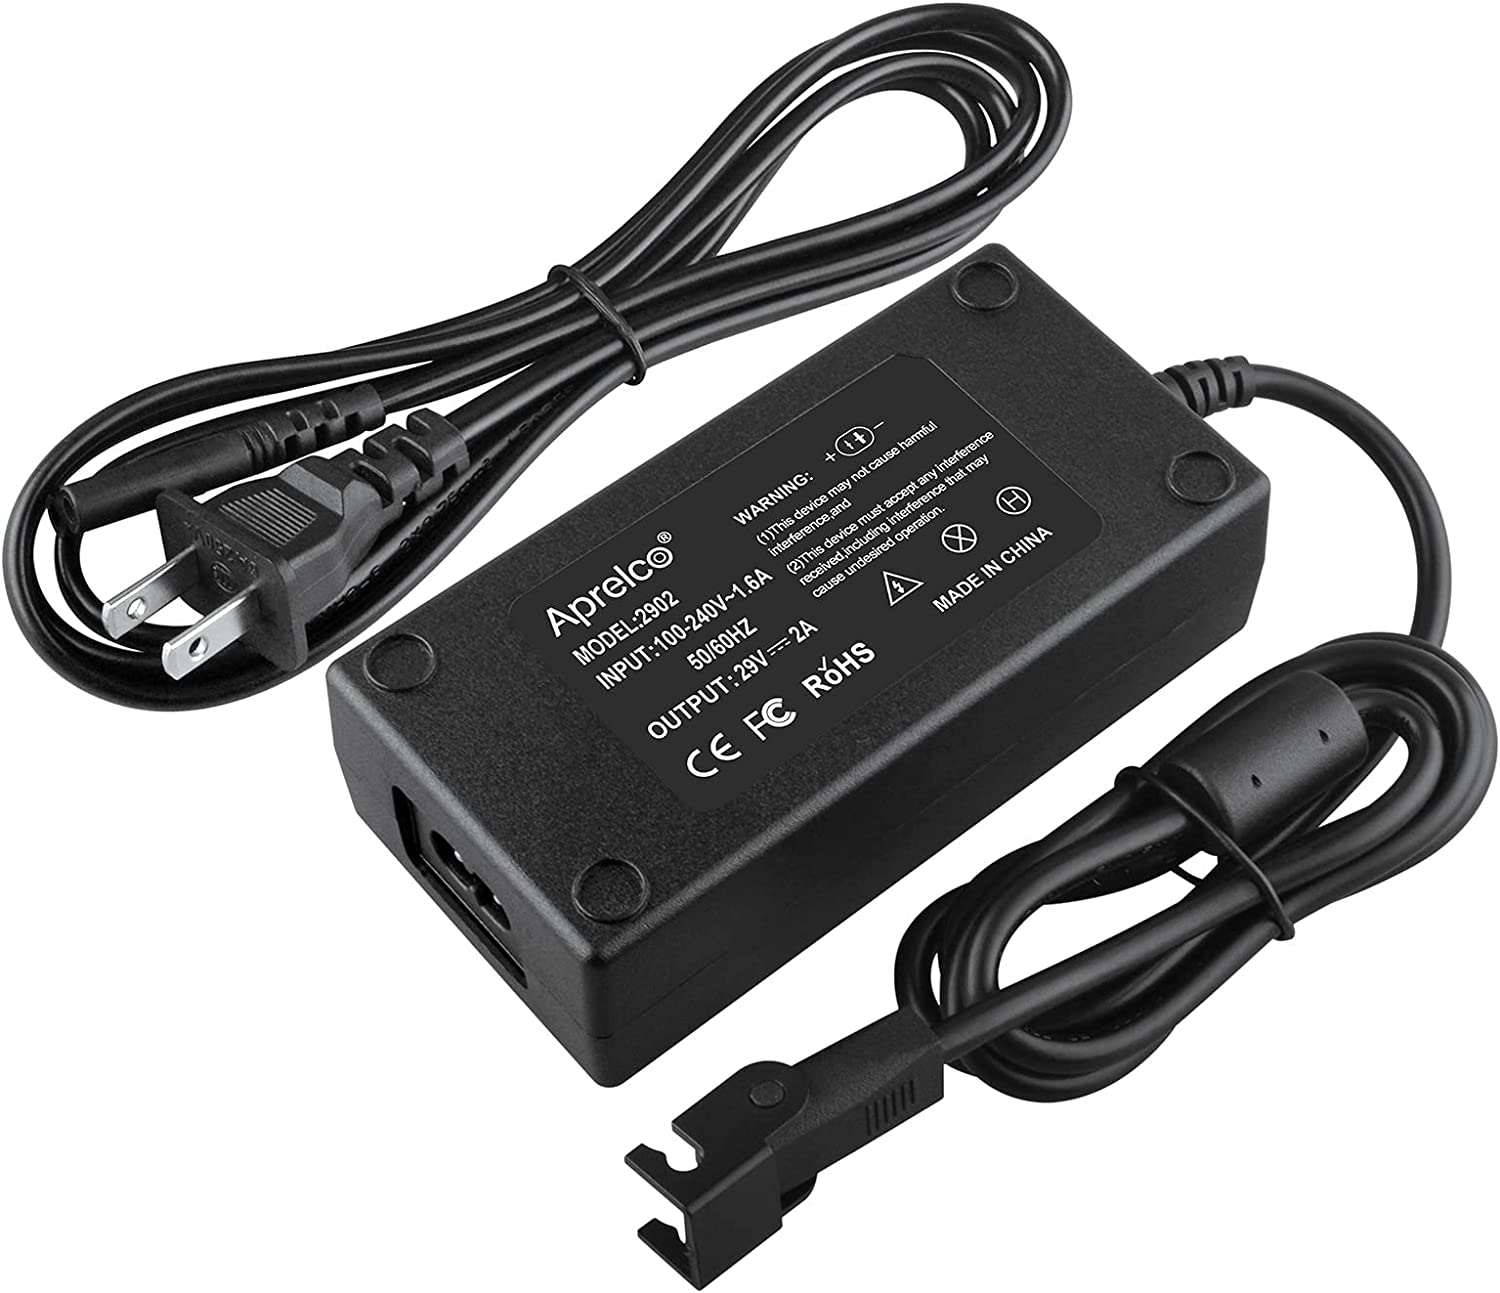 Aprelco 2-Prong AC DC Adapter Charger Replacement for Tranquil Ease IVP2900-1650 SPS-1.65A29V-01-CAT Lift Chair Switching Transformer Power Supply Cord - image 1 of 5